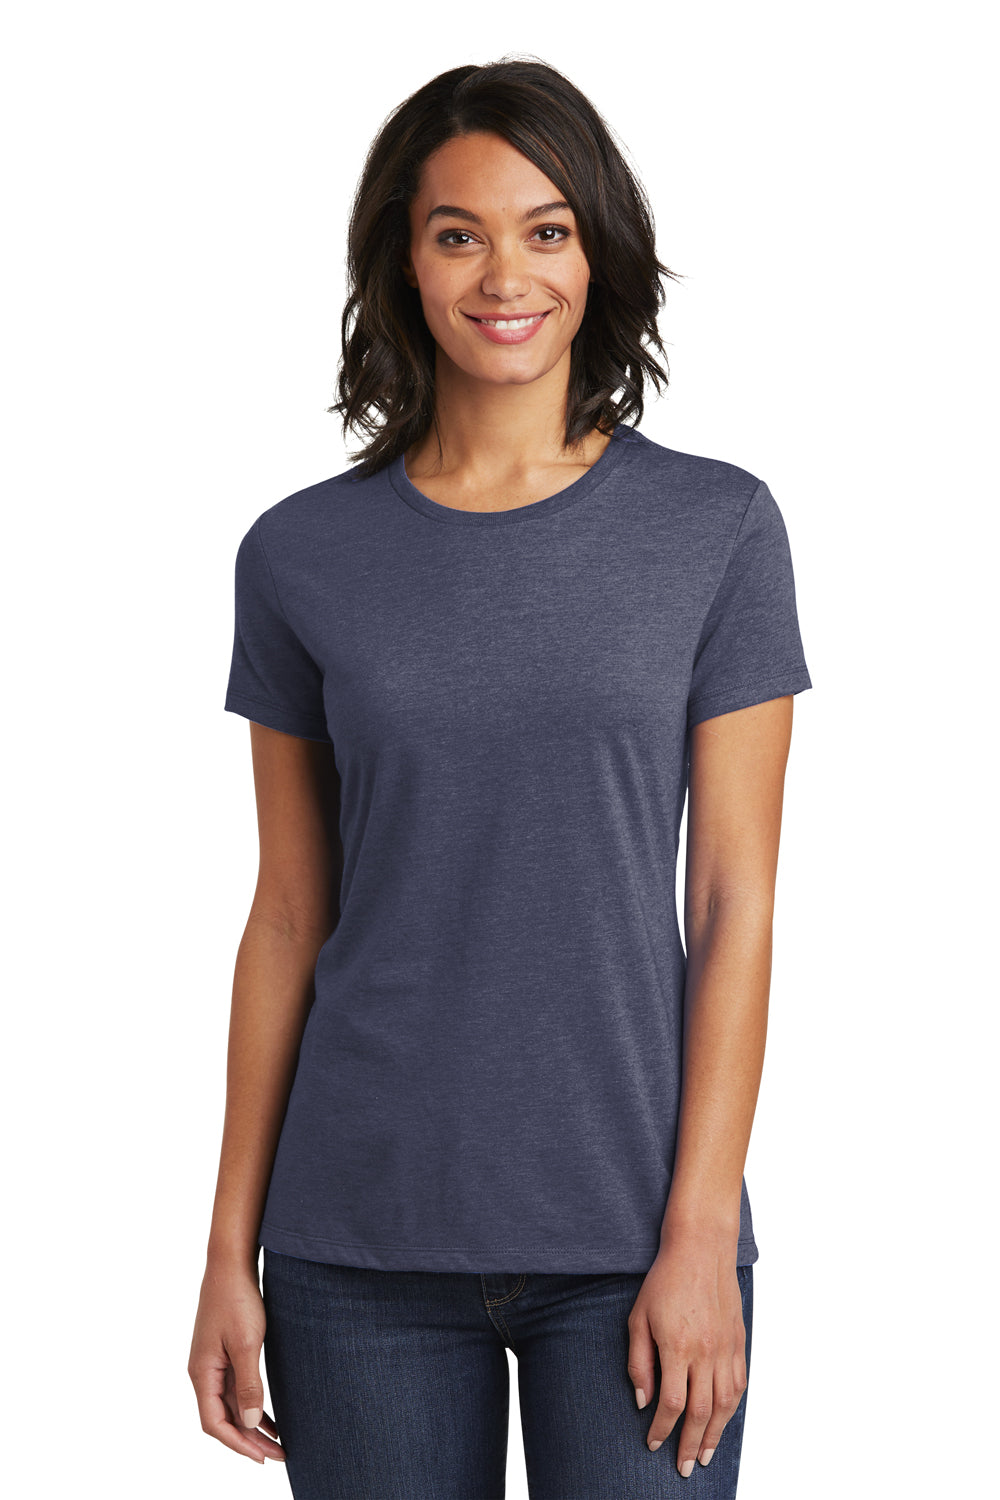 District DT6002 Womens Very Important Short Sleeve Crewneck T-Shirt Heather Navy Blue Front